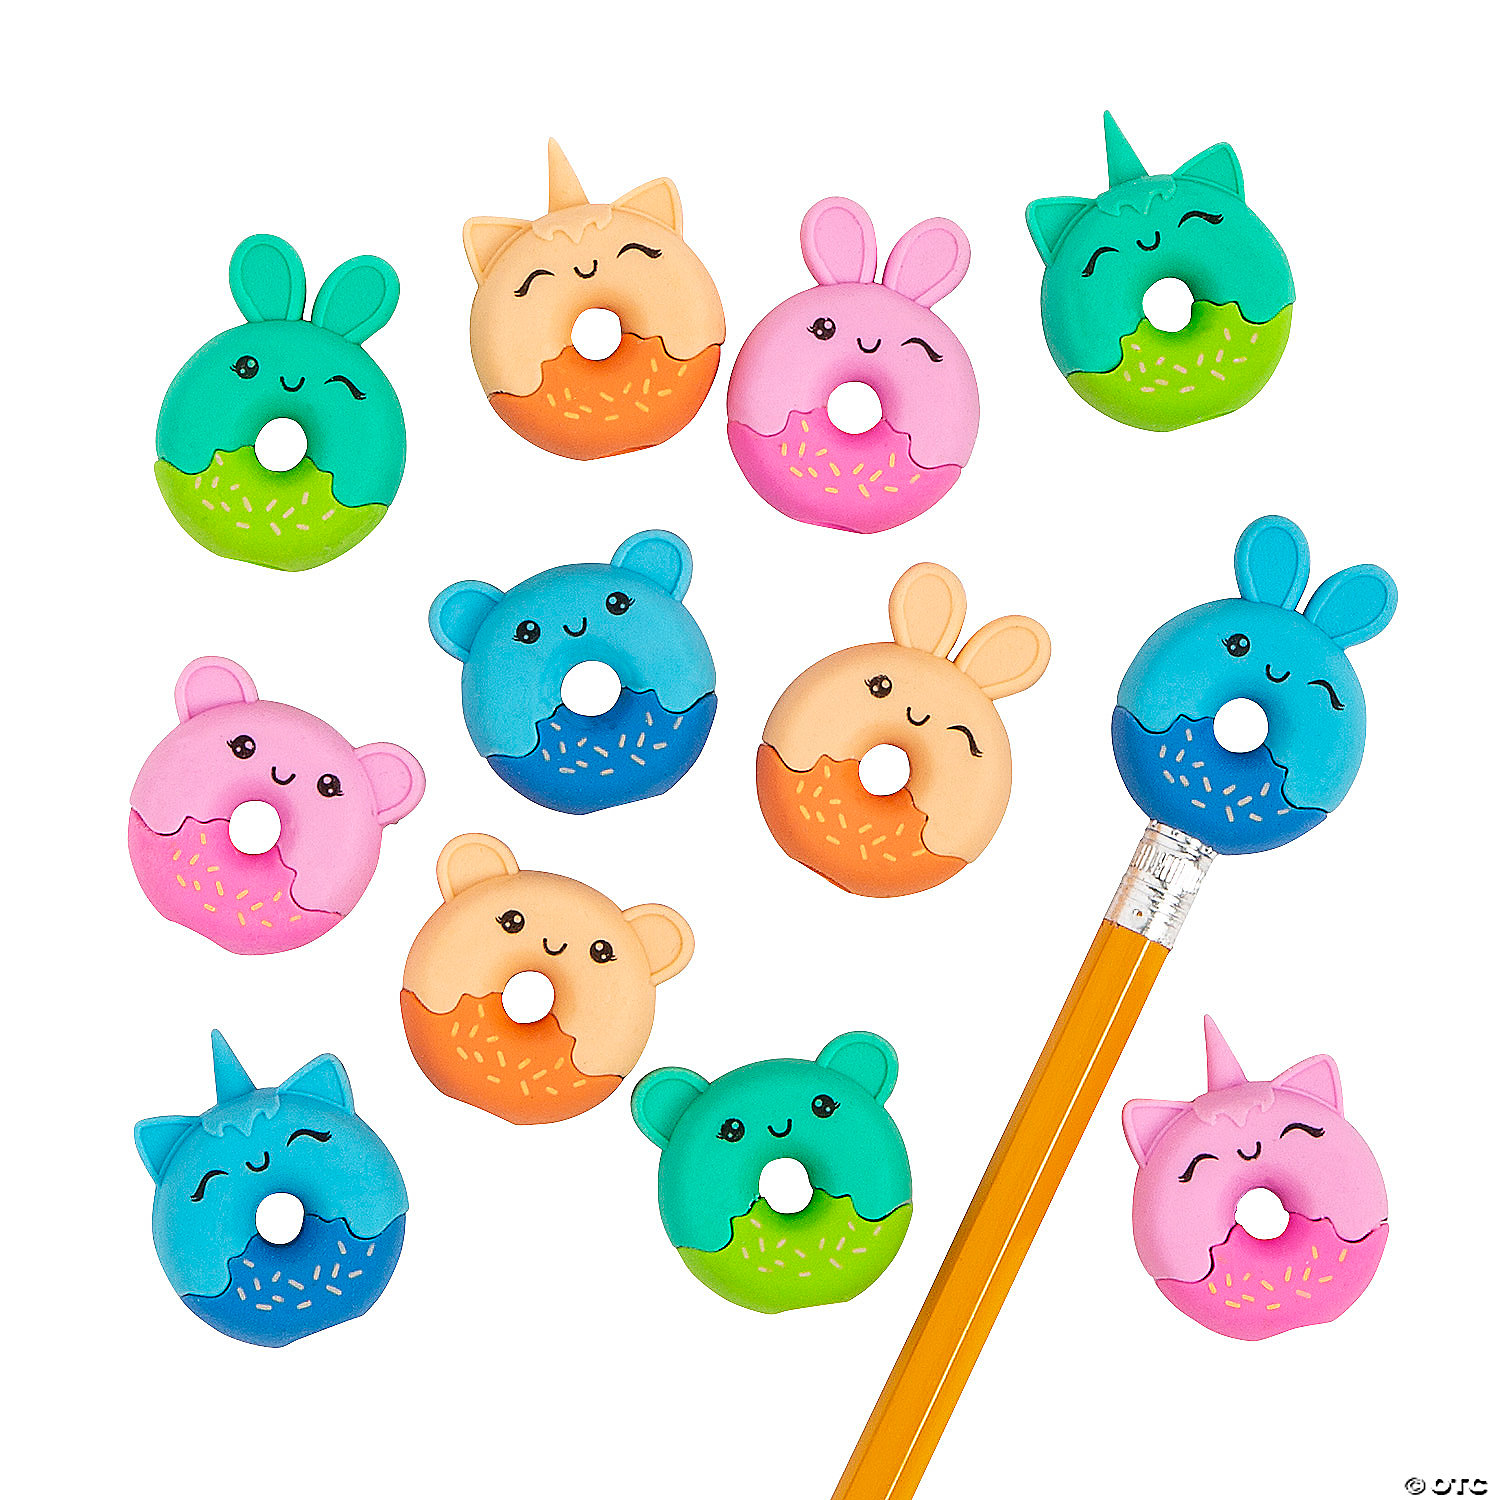 6 Pencils With Cute Animal Rubber Eraser Toppers Party Gift Bag Fillers For Kids 